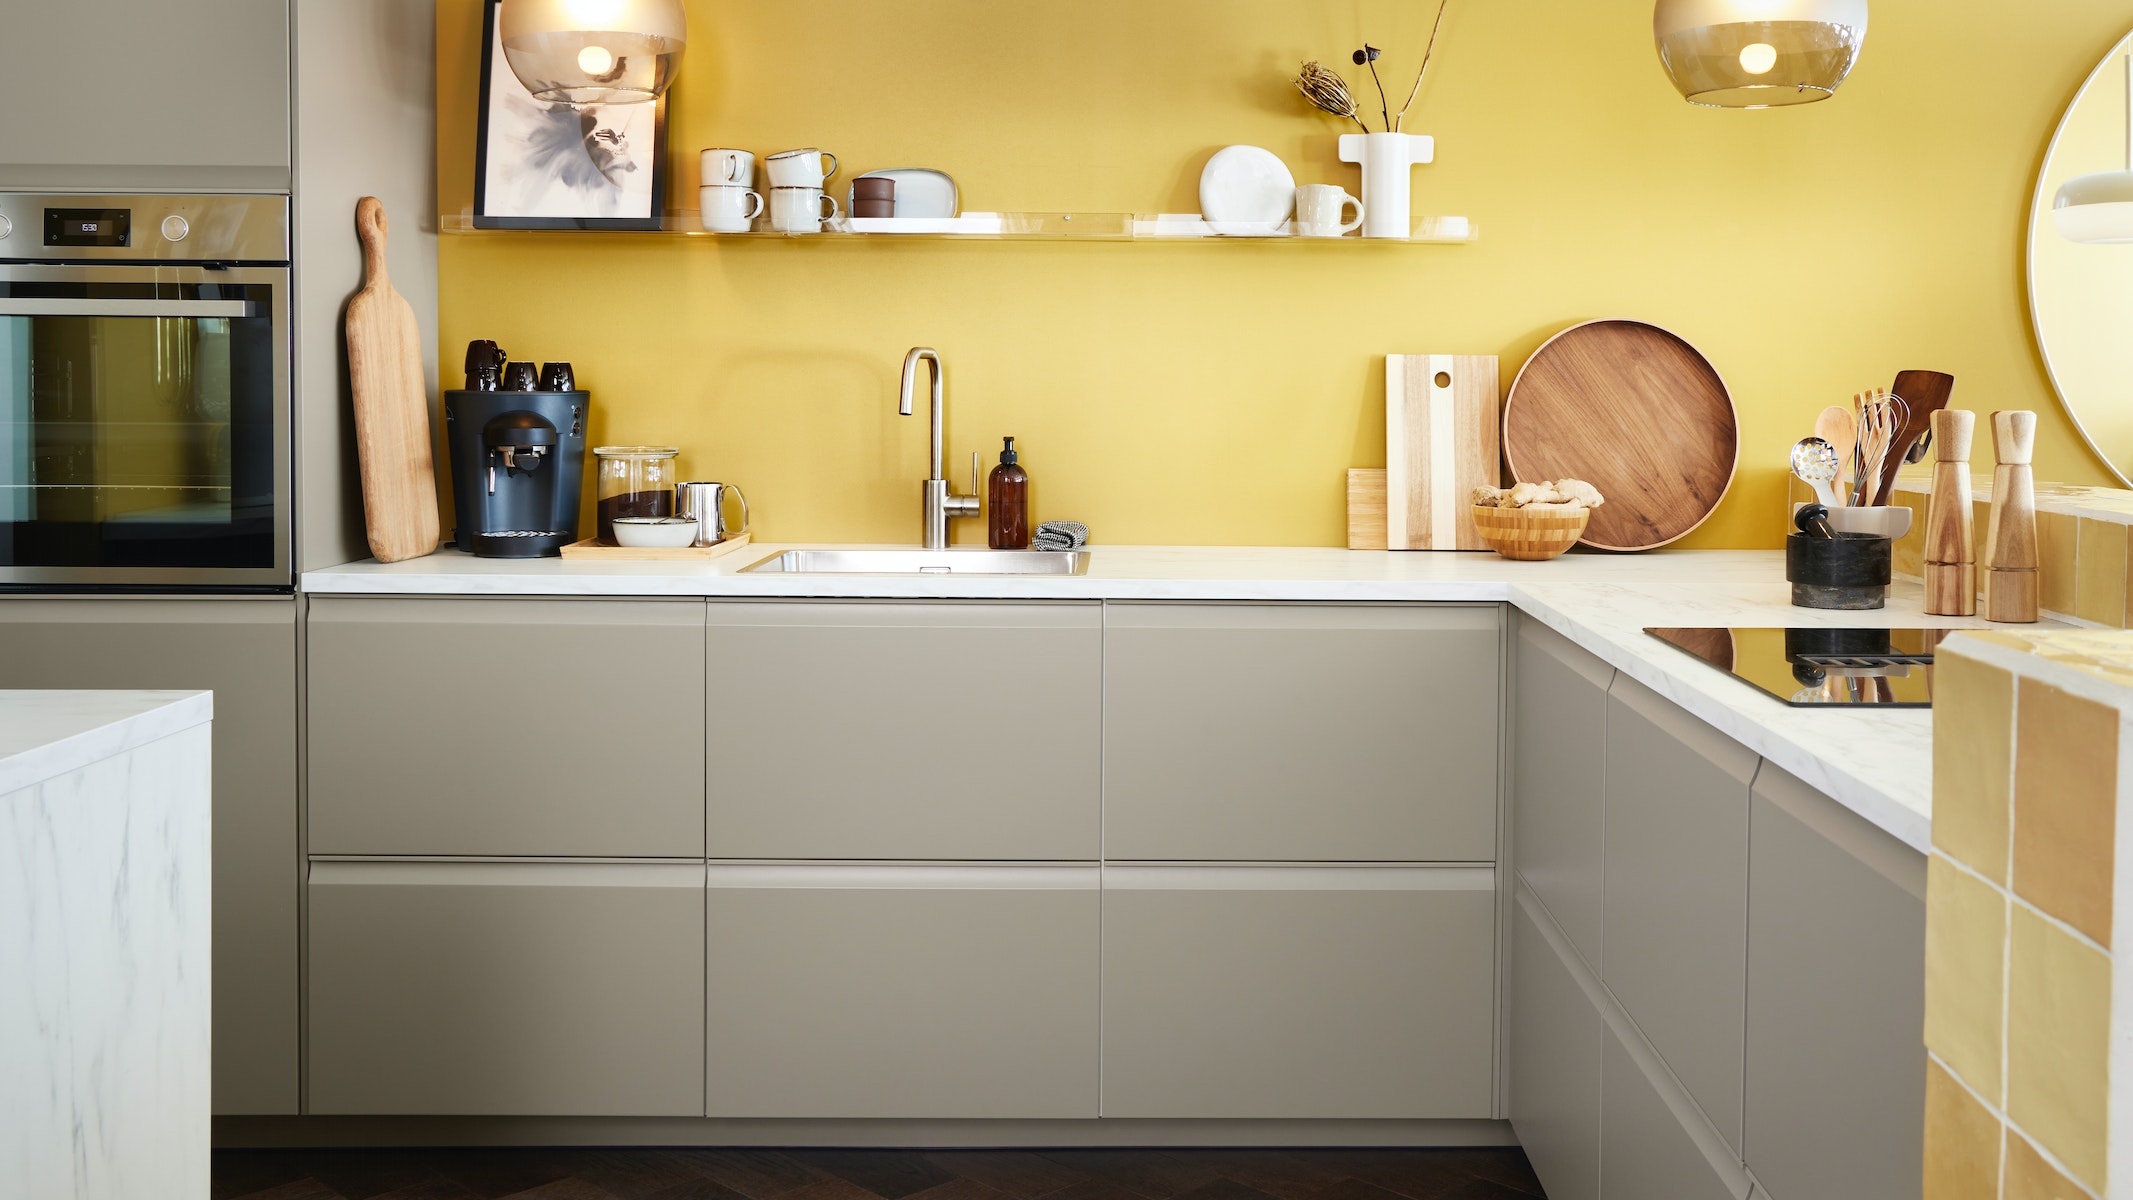 IKEA - A kitchen that's complete, bright and open for the whole family